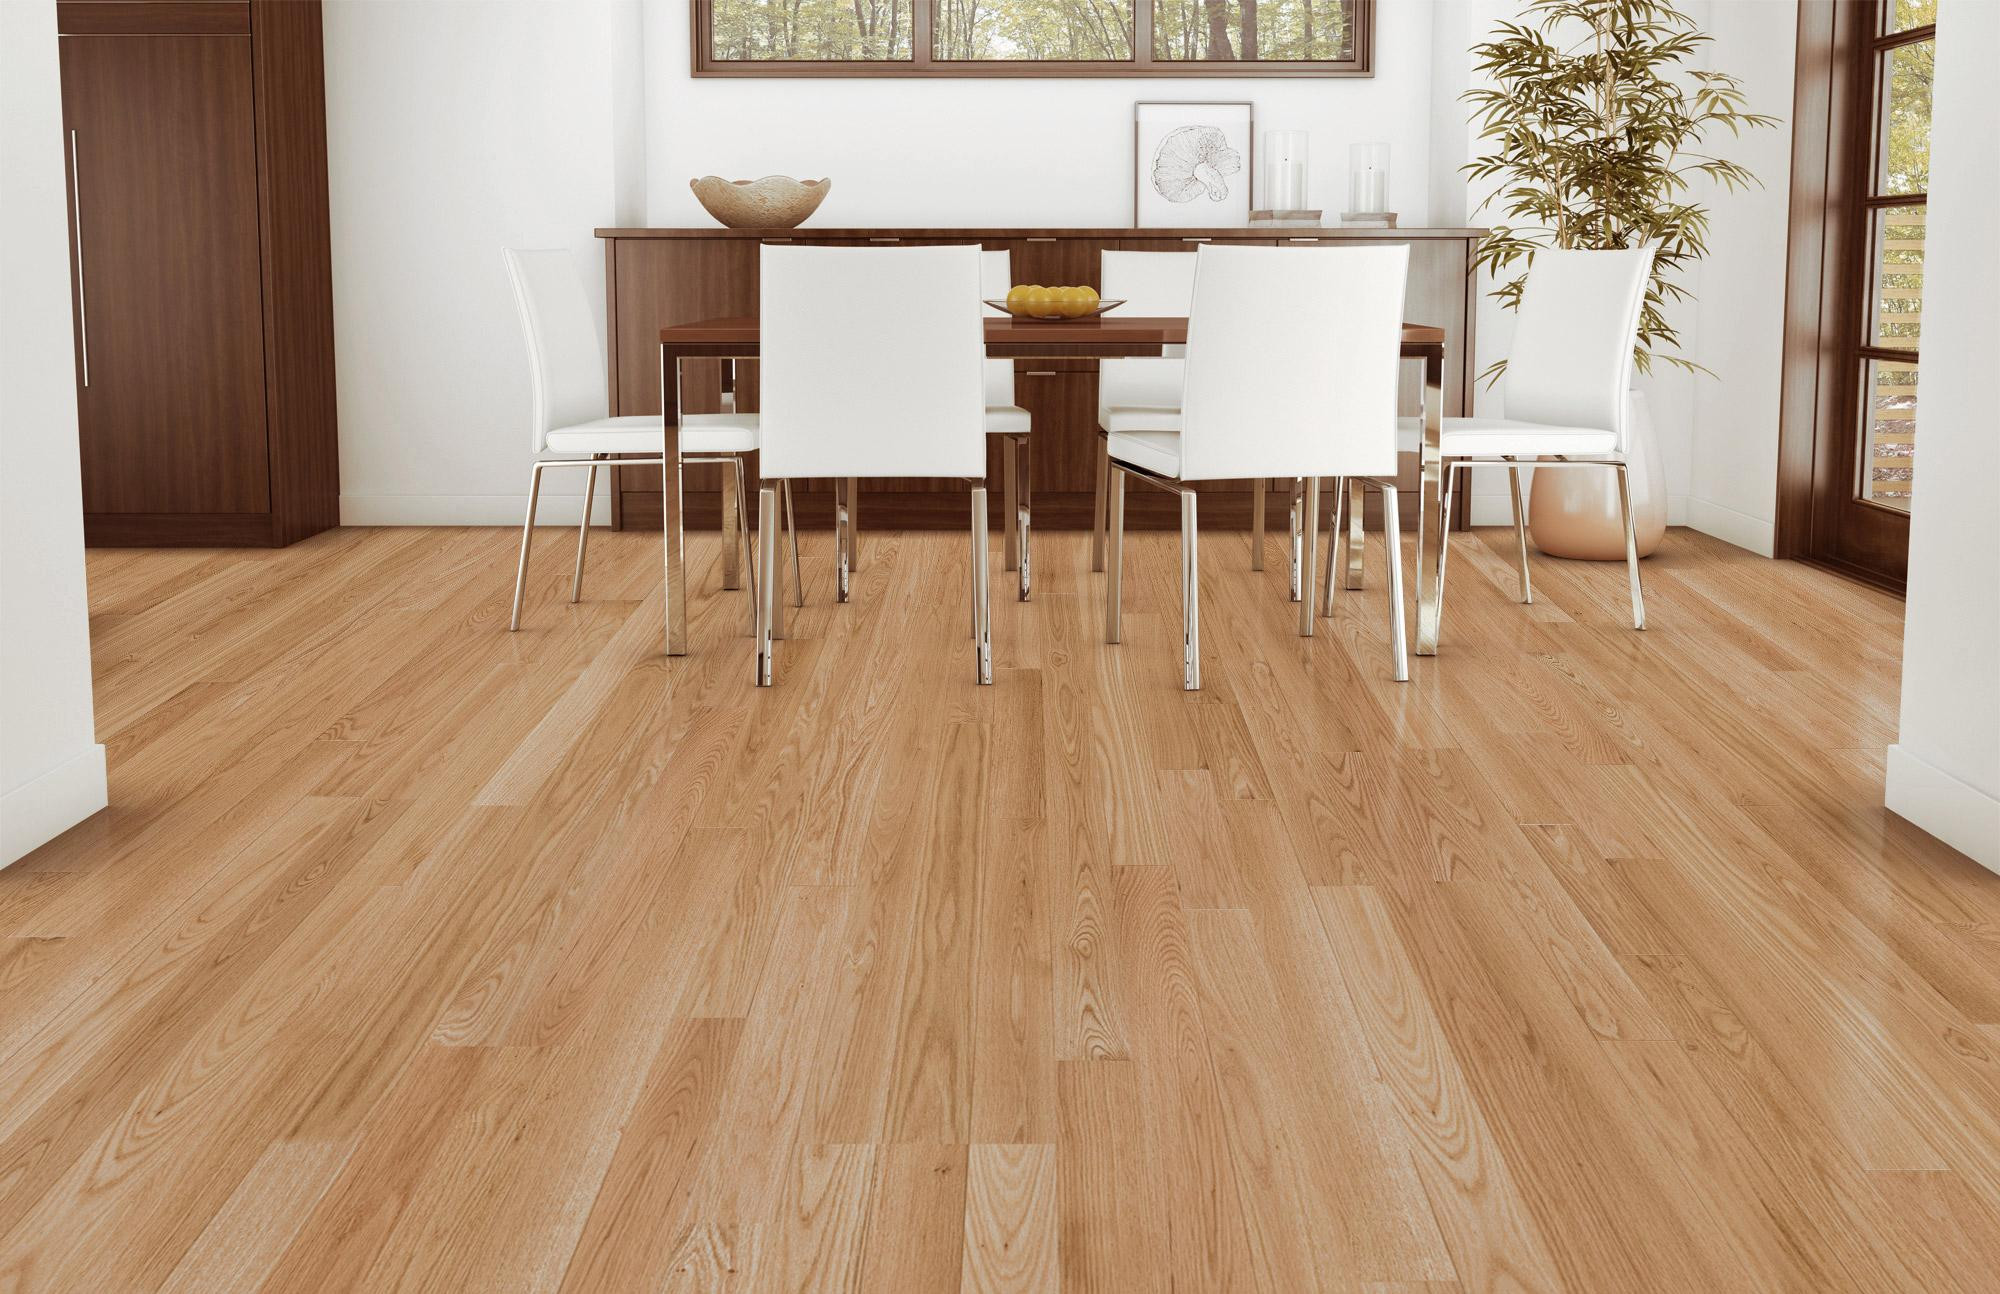 22 Amazing Red Oak Hardwood Flooring Cost 2024 free download red oak hardwood flooring cost of mullican ridgecrest red oak natural 1 2 thick 5 wide engineered within mullican ridgecrest red oak natural 1 2 thick 5 wide engineered hardwood flooring